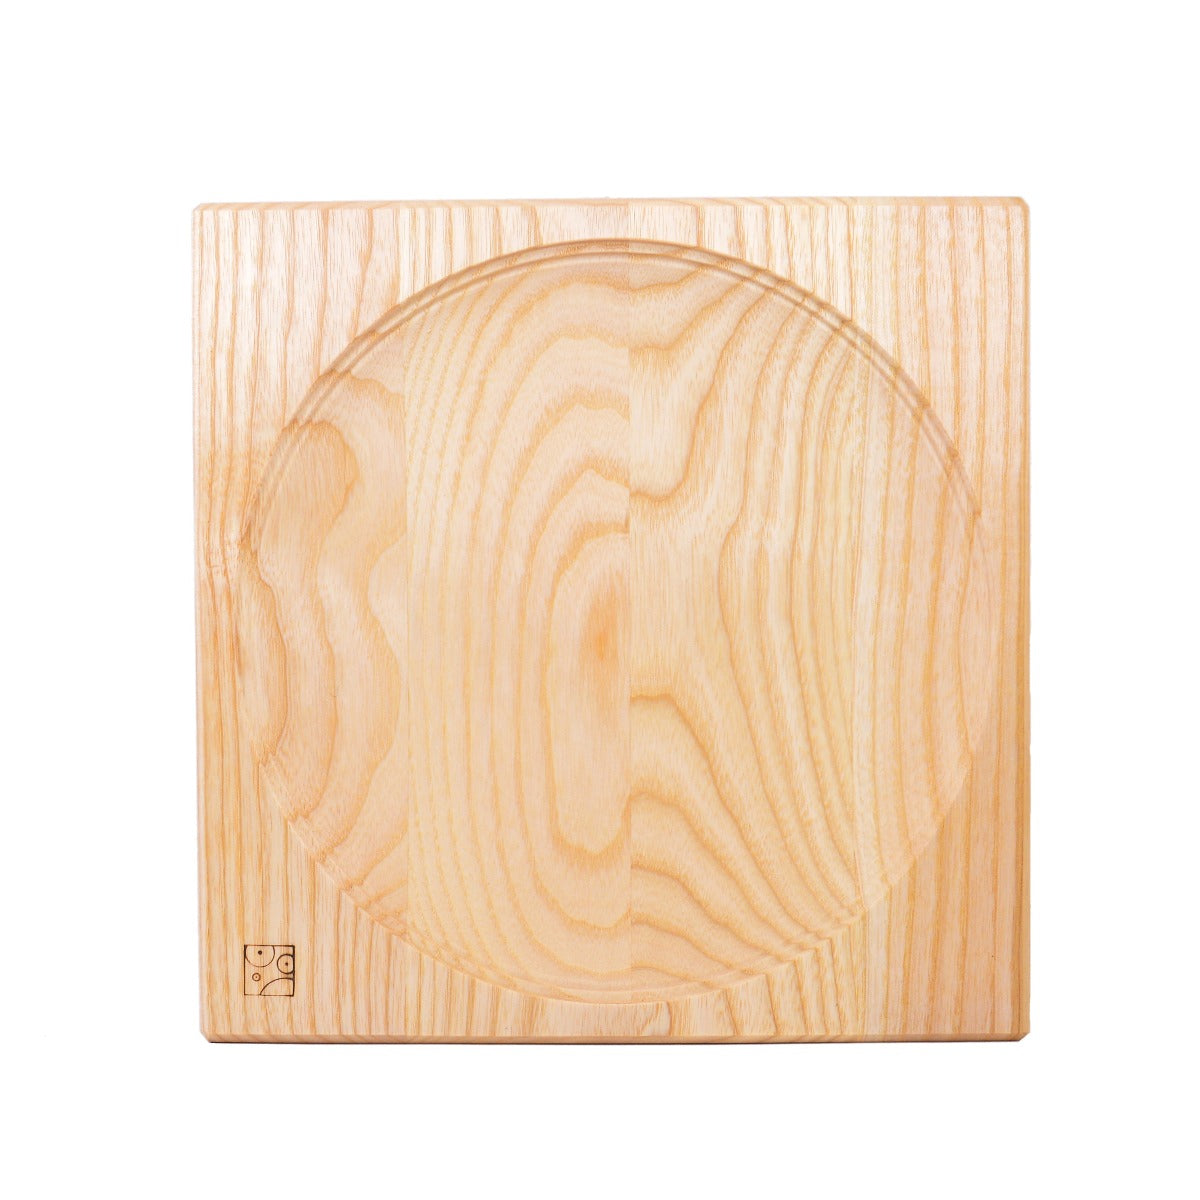 Mader Wooden Plate for Spinning Tops 15 cm